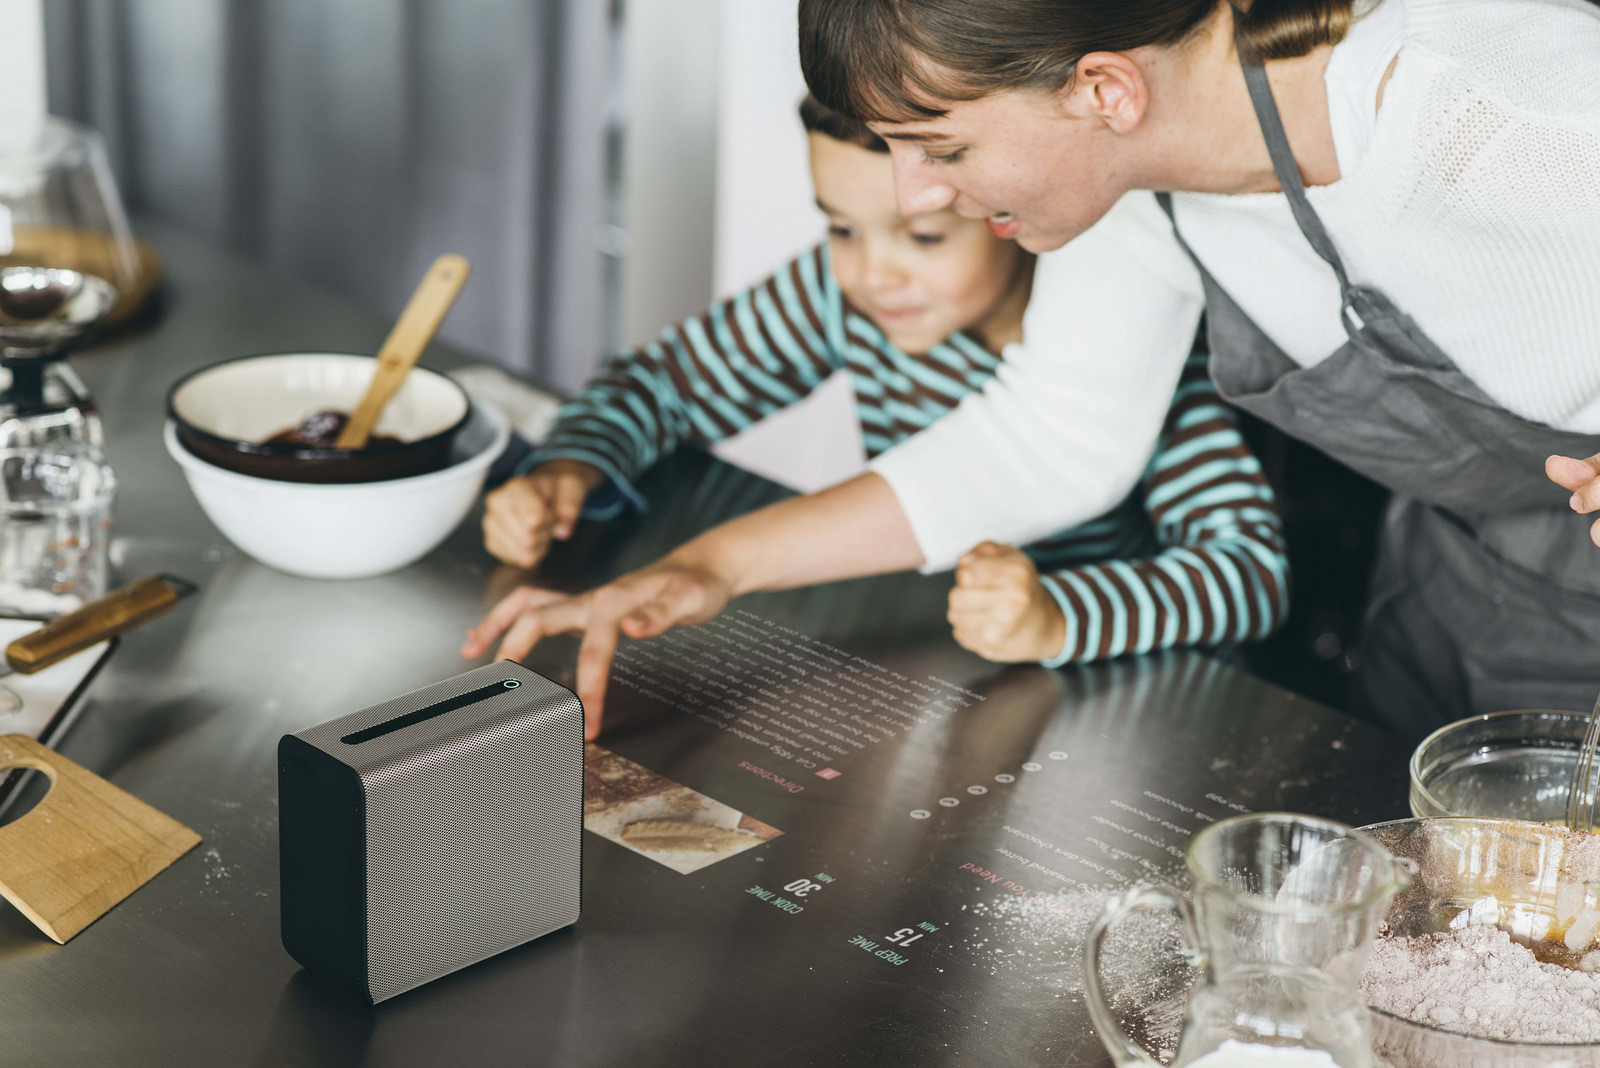 MWC 2017: Sony unveils 'Xperia Touch' interactive Android projector and an open-ear concept headphones